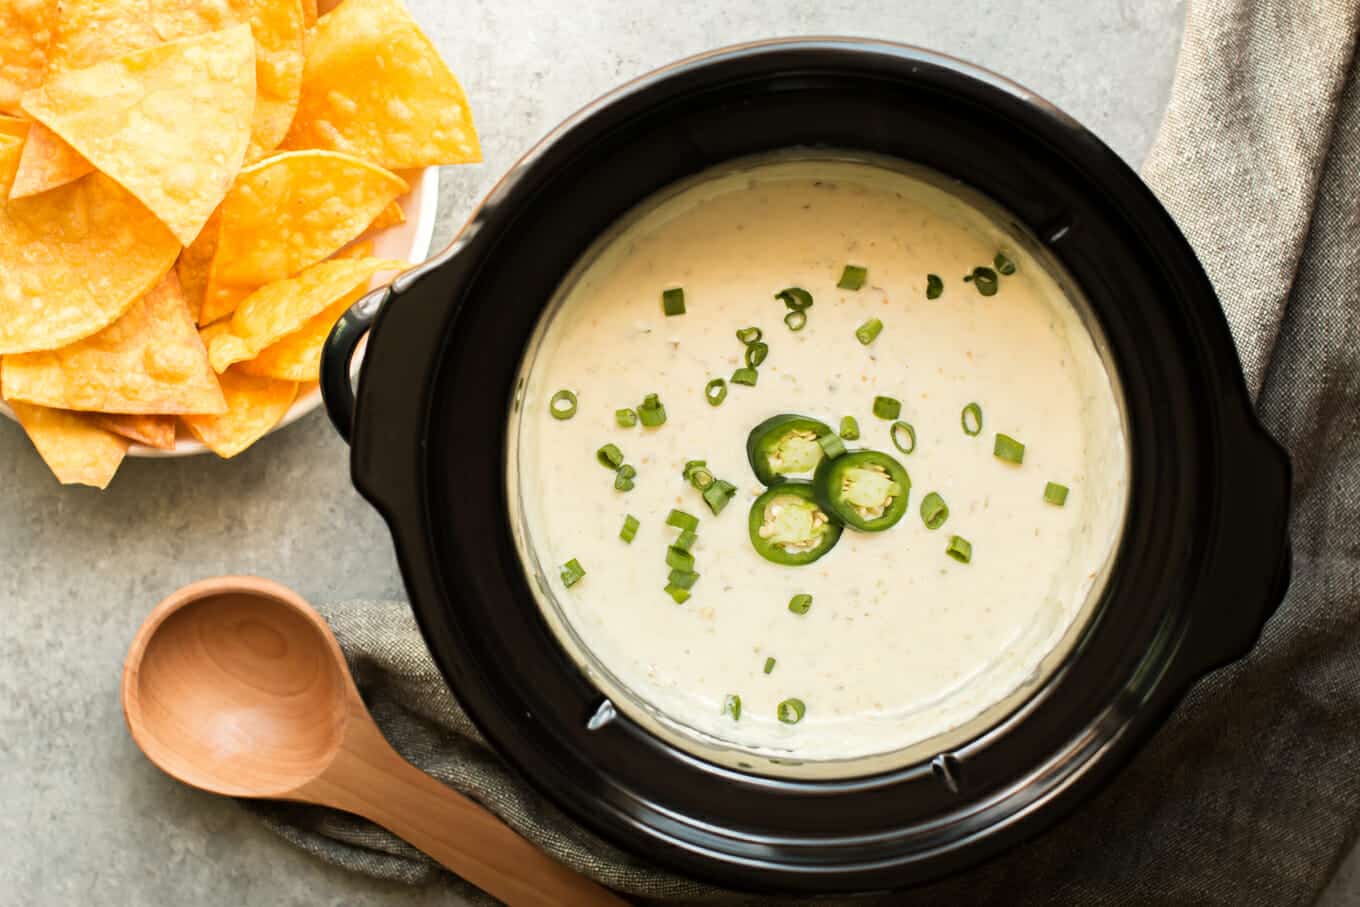 round slow cooker full of queso verde, chips on the side.